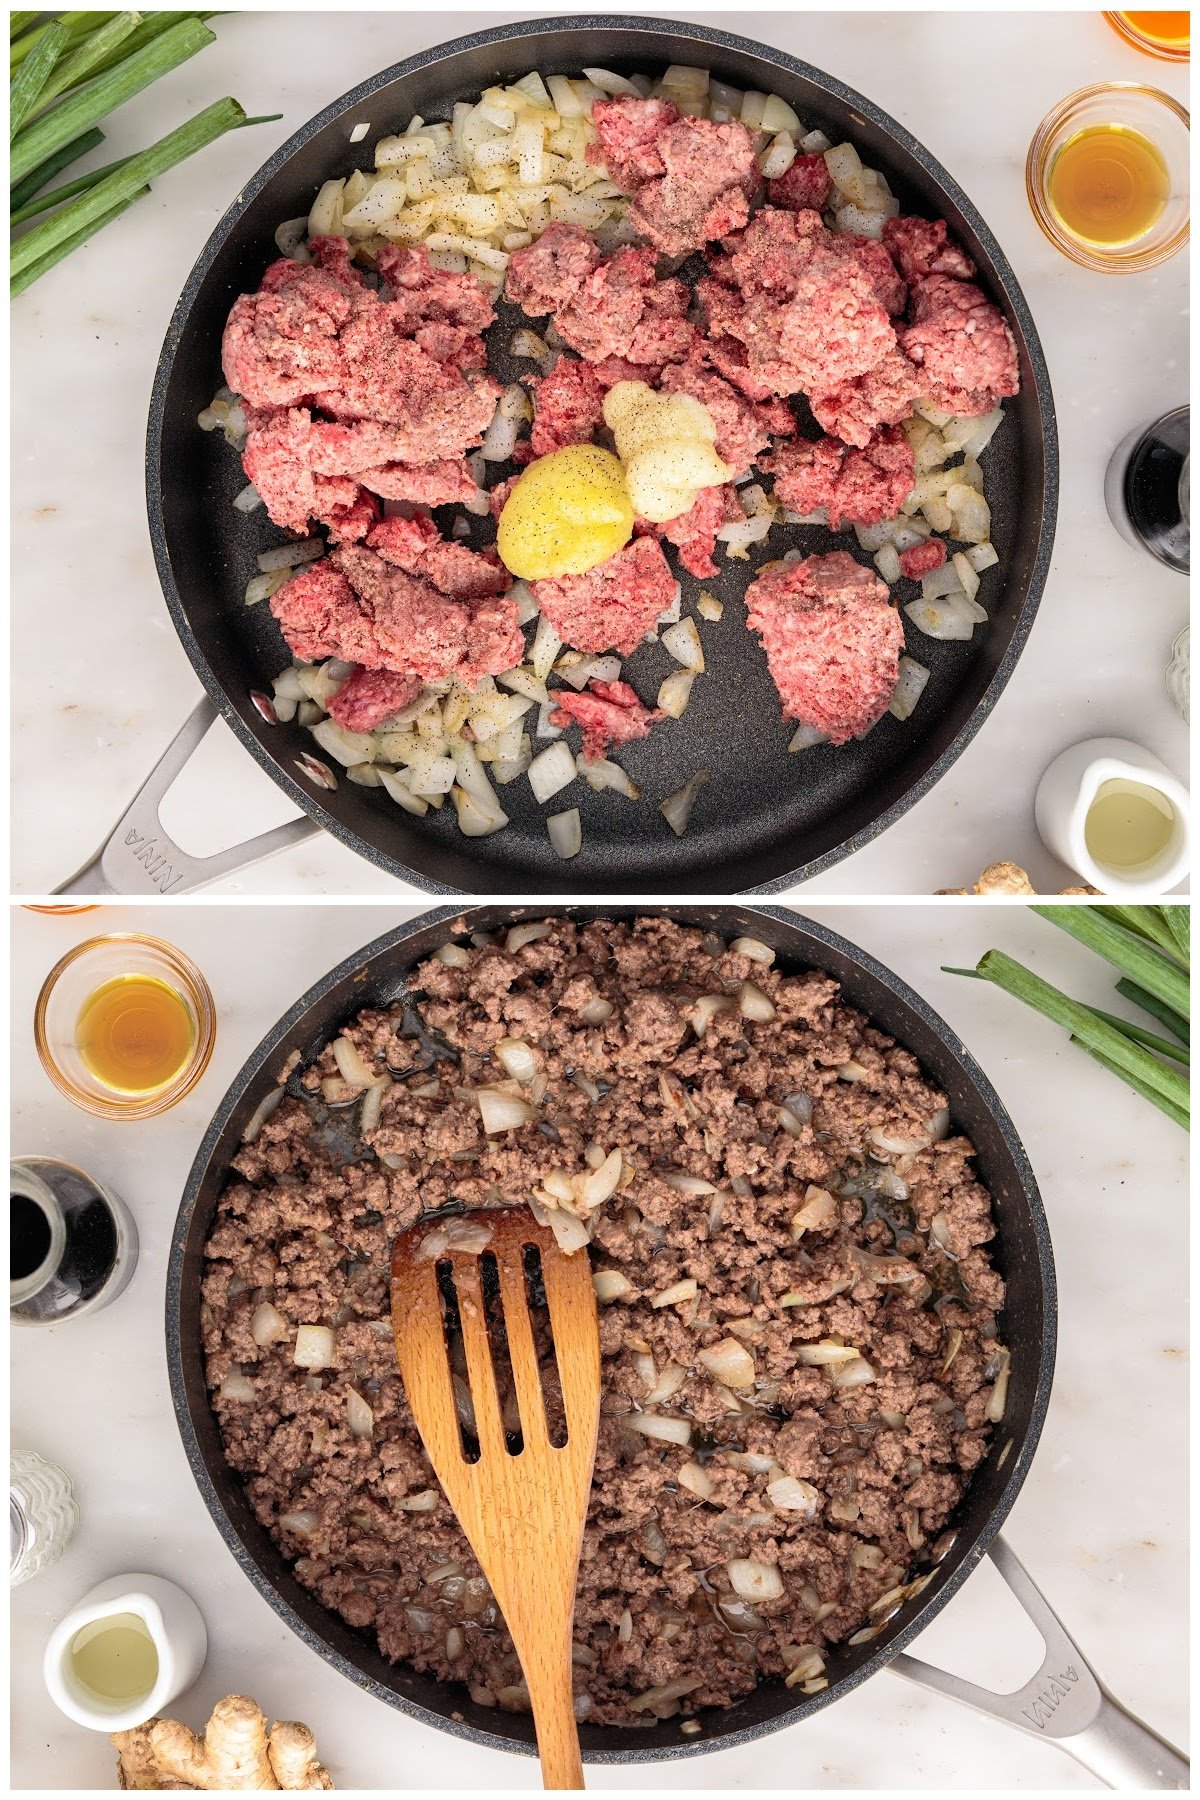 Two images of ground beef and ginger added to onions and ground beef after being cooked in skillet.